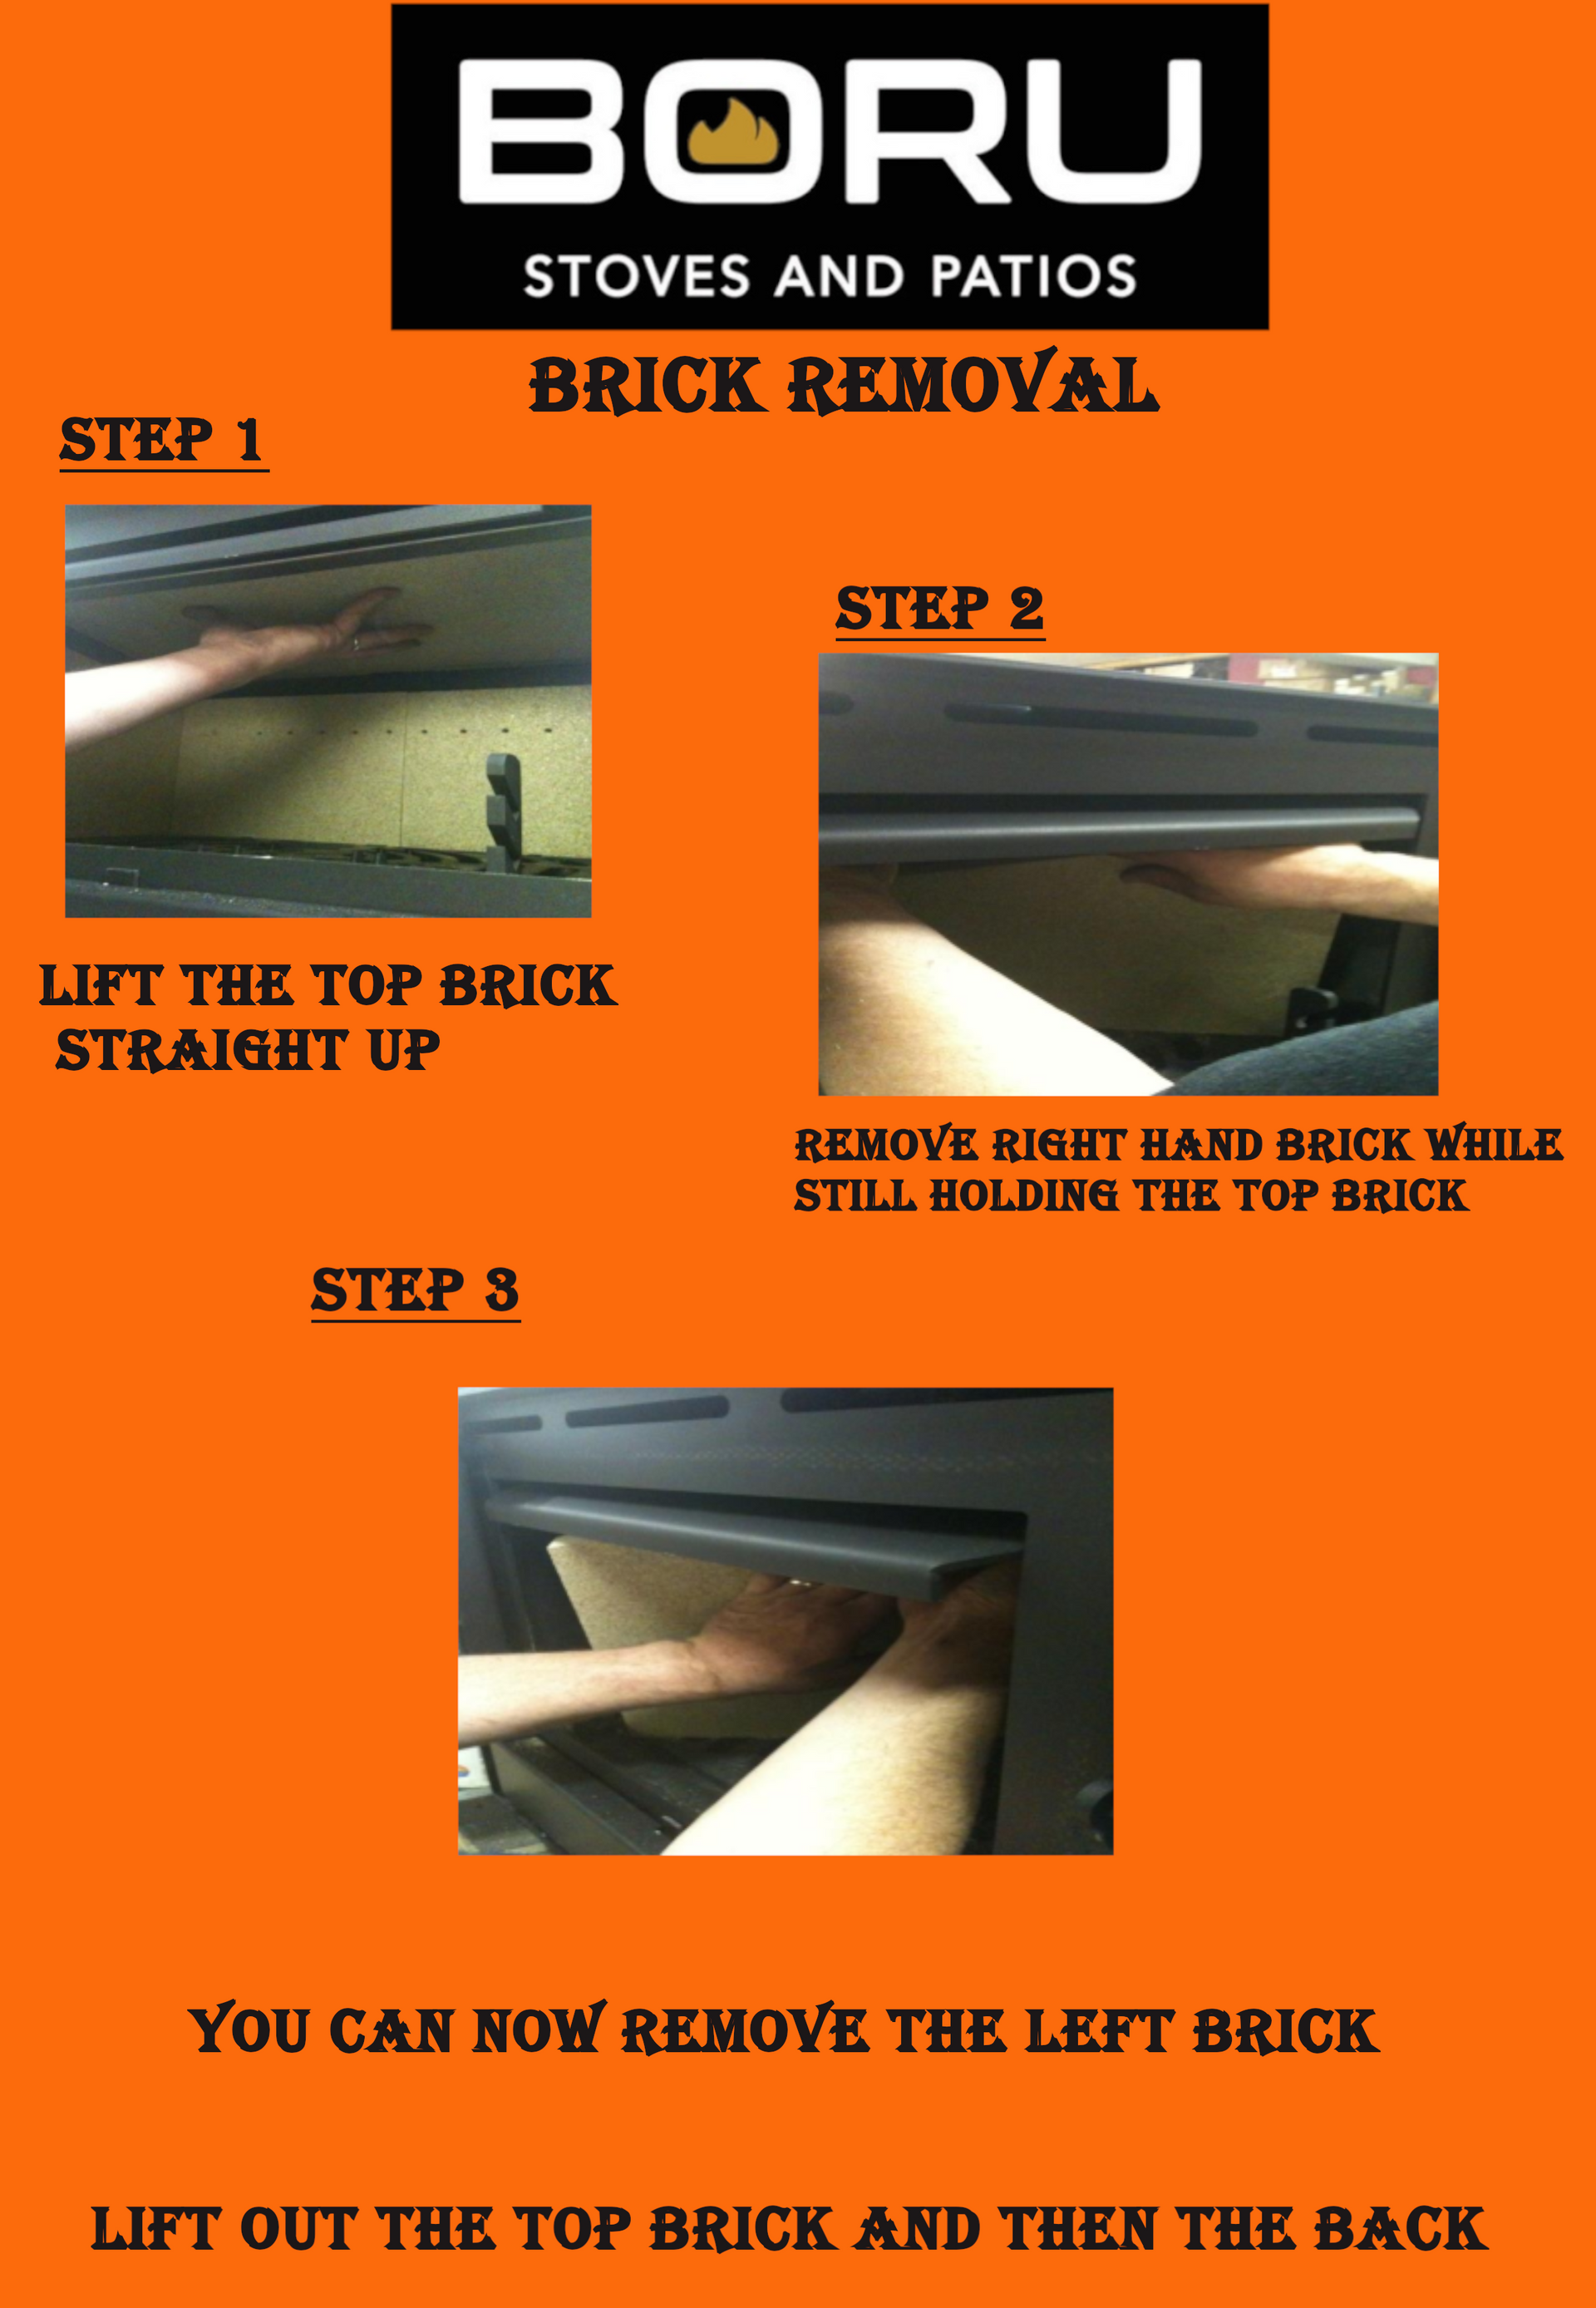 How to remove your stove bricks